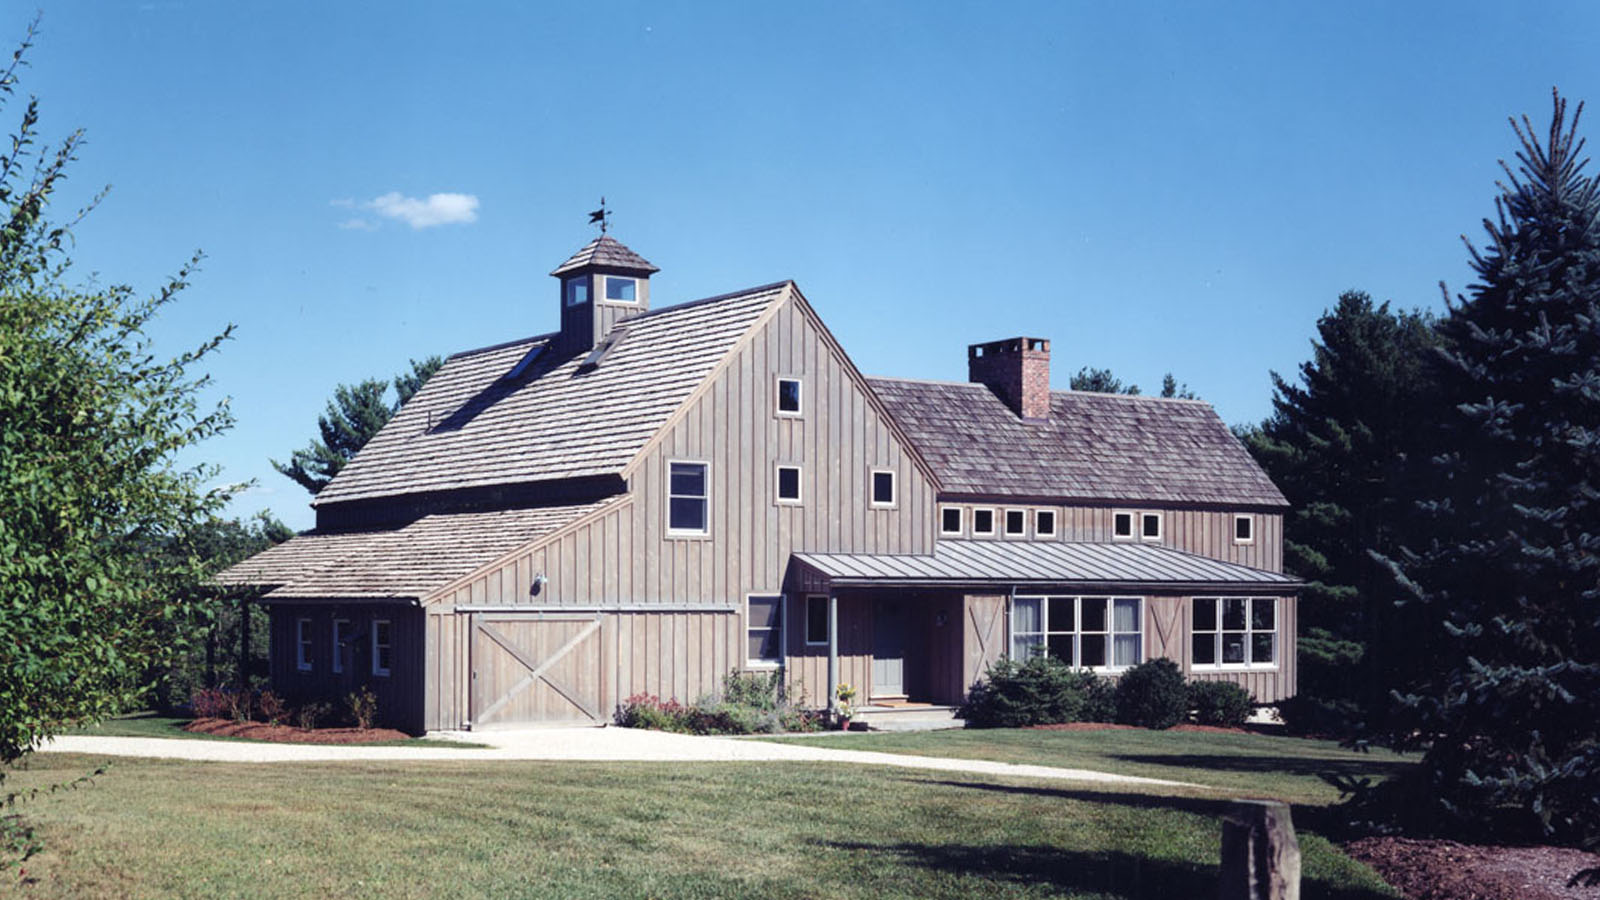 4500 Connecticut Barn Home exterior featuring board and batten siding and barn style doors